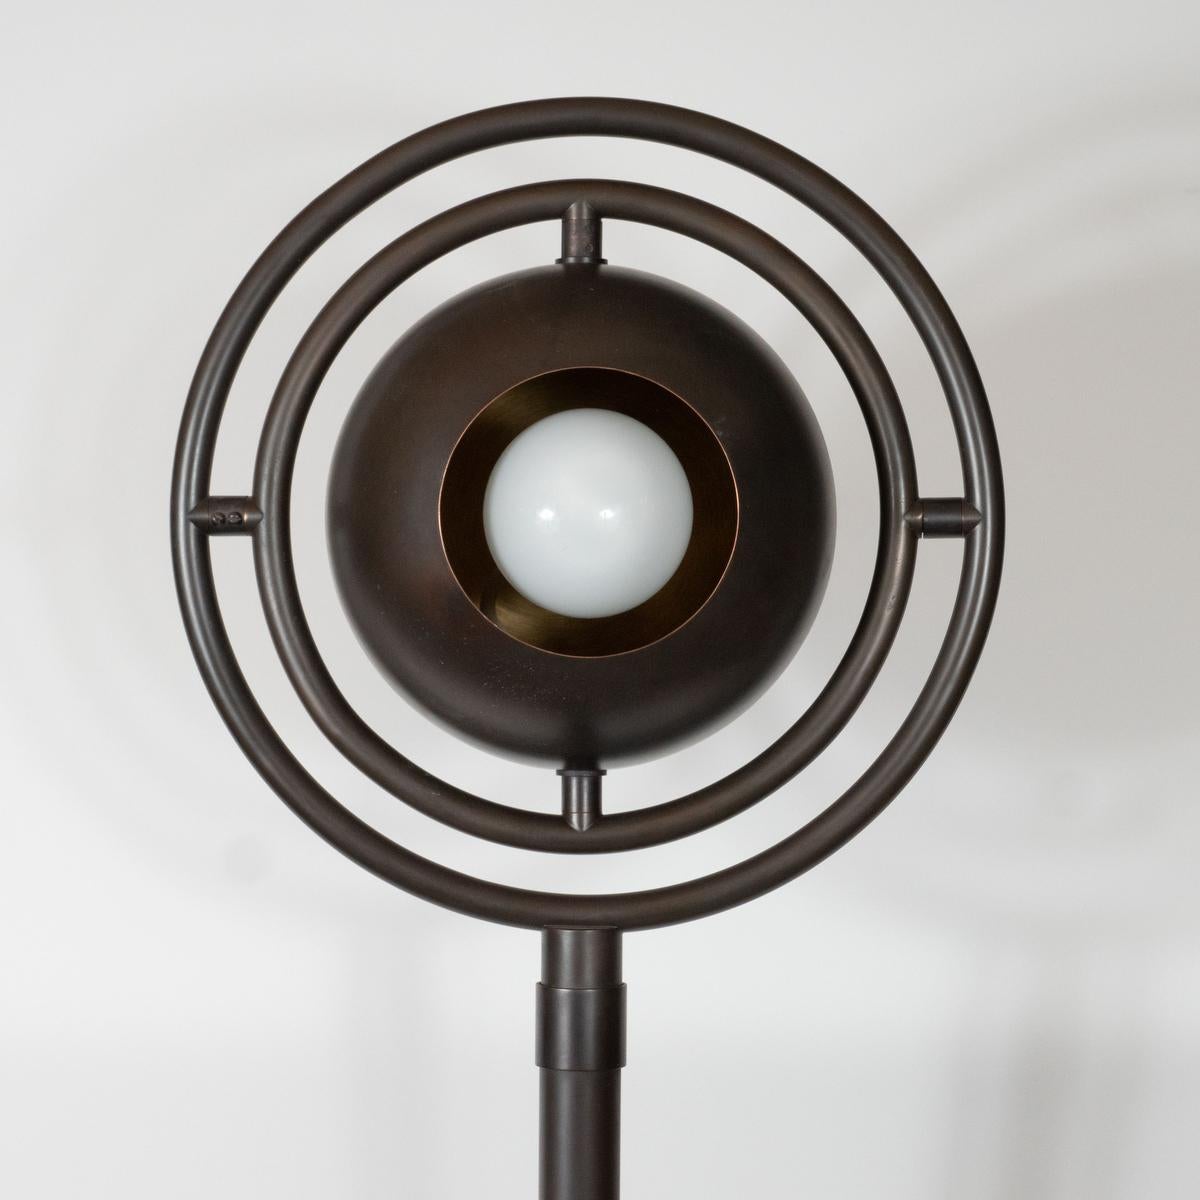 Space Age, patinated brass floor lamp with adjustable orbital shade.